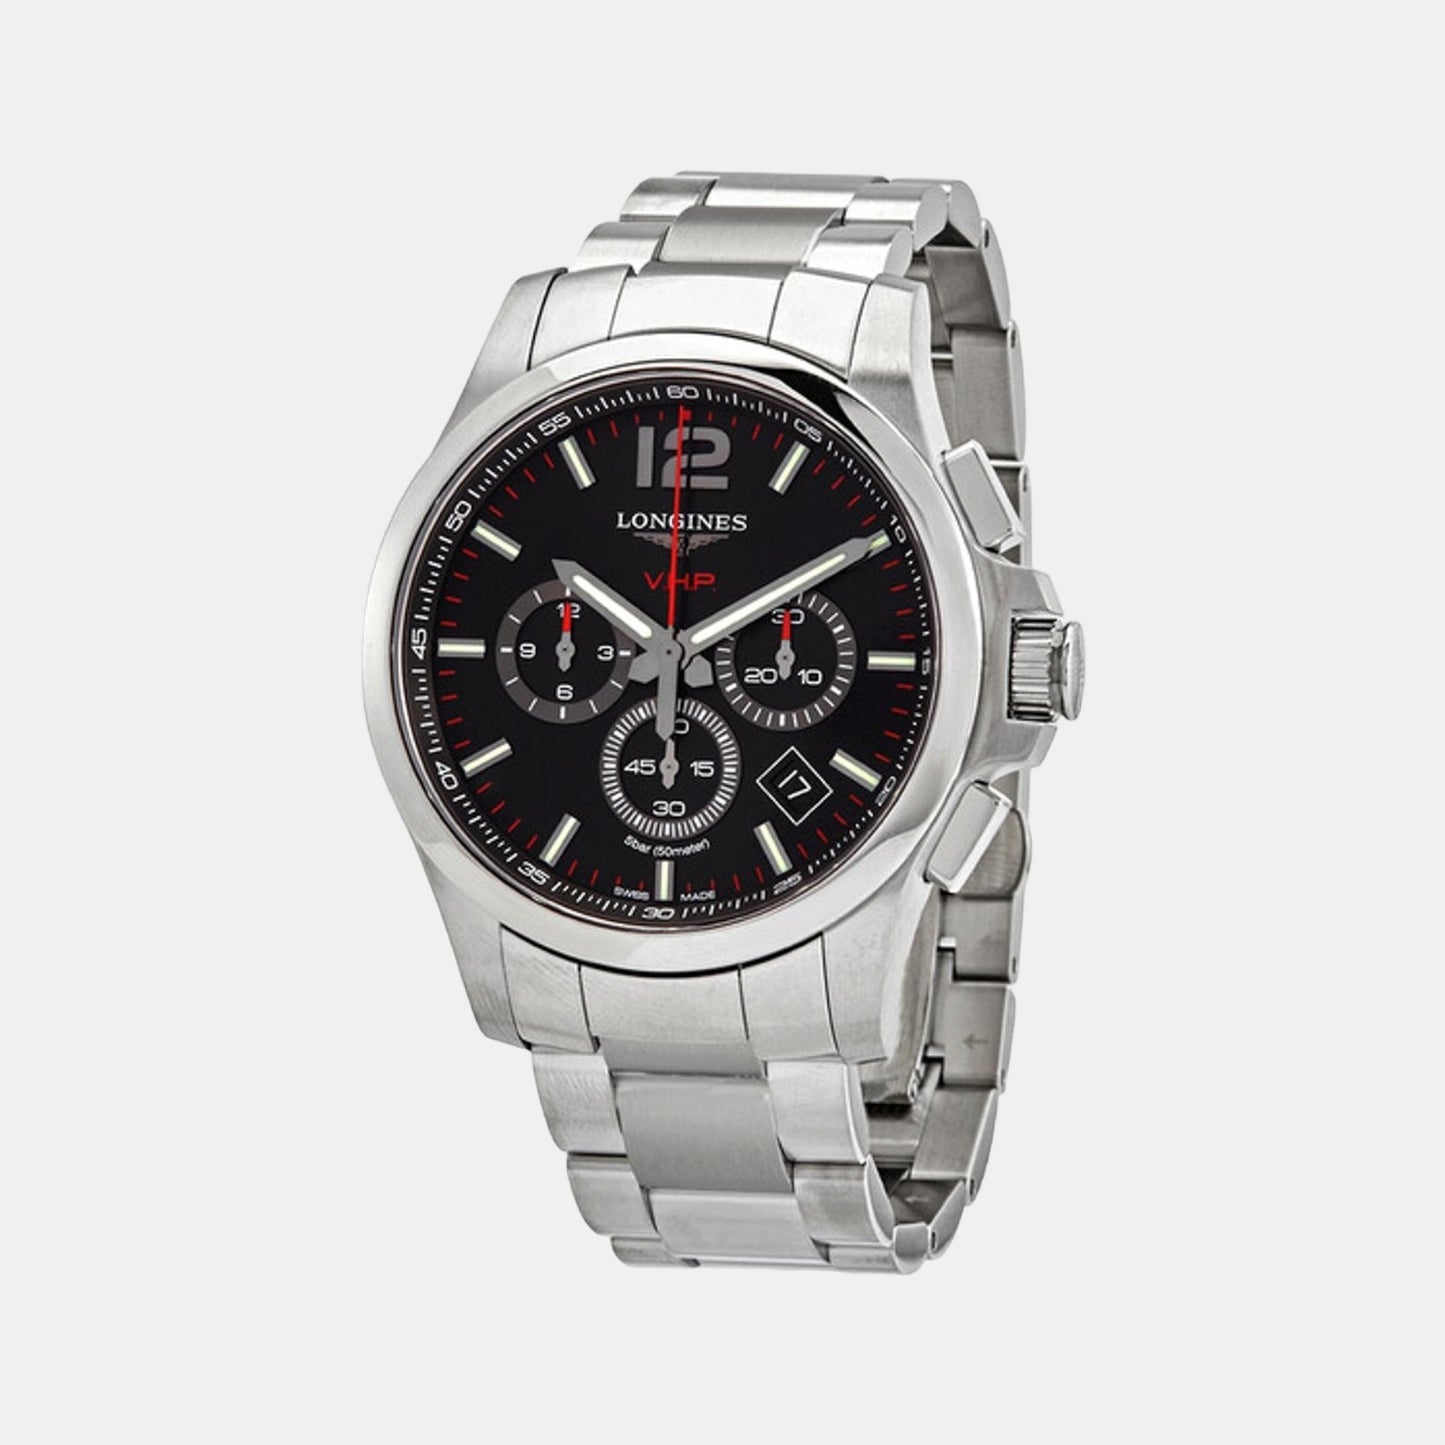 Male Black Stainless Steel Chronograph Watch L37274566